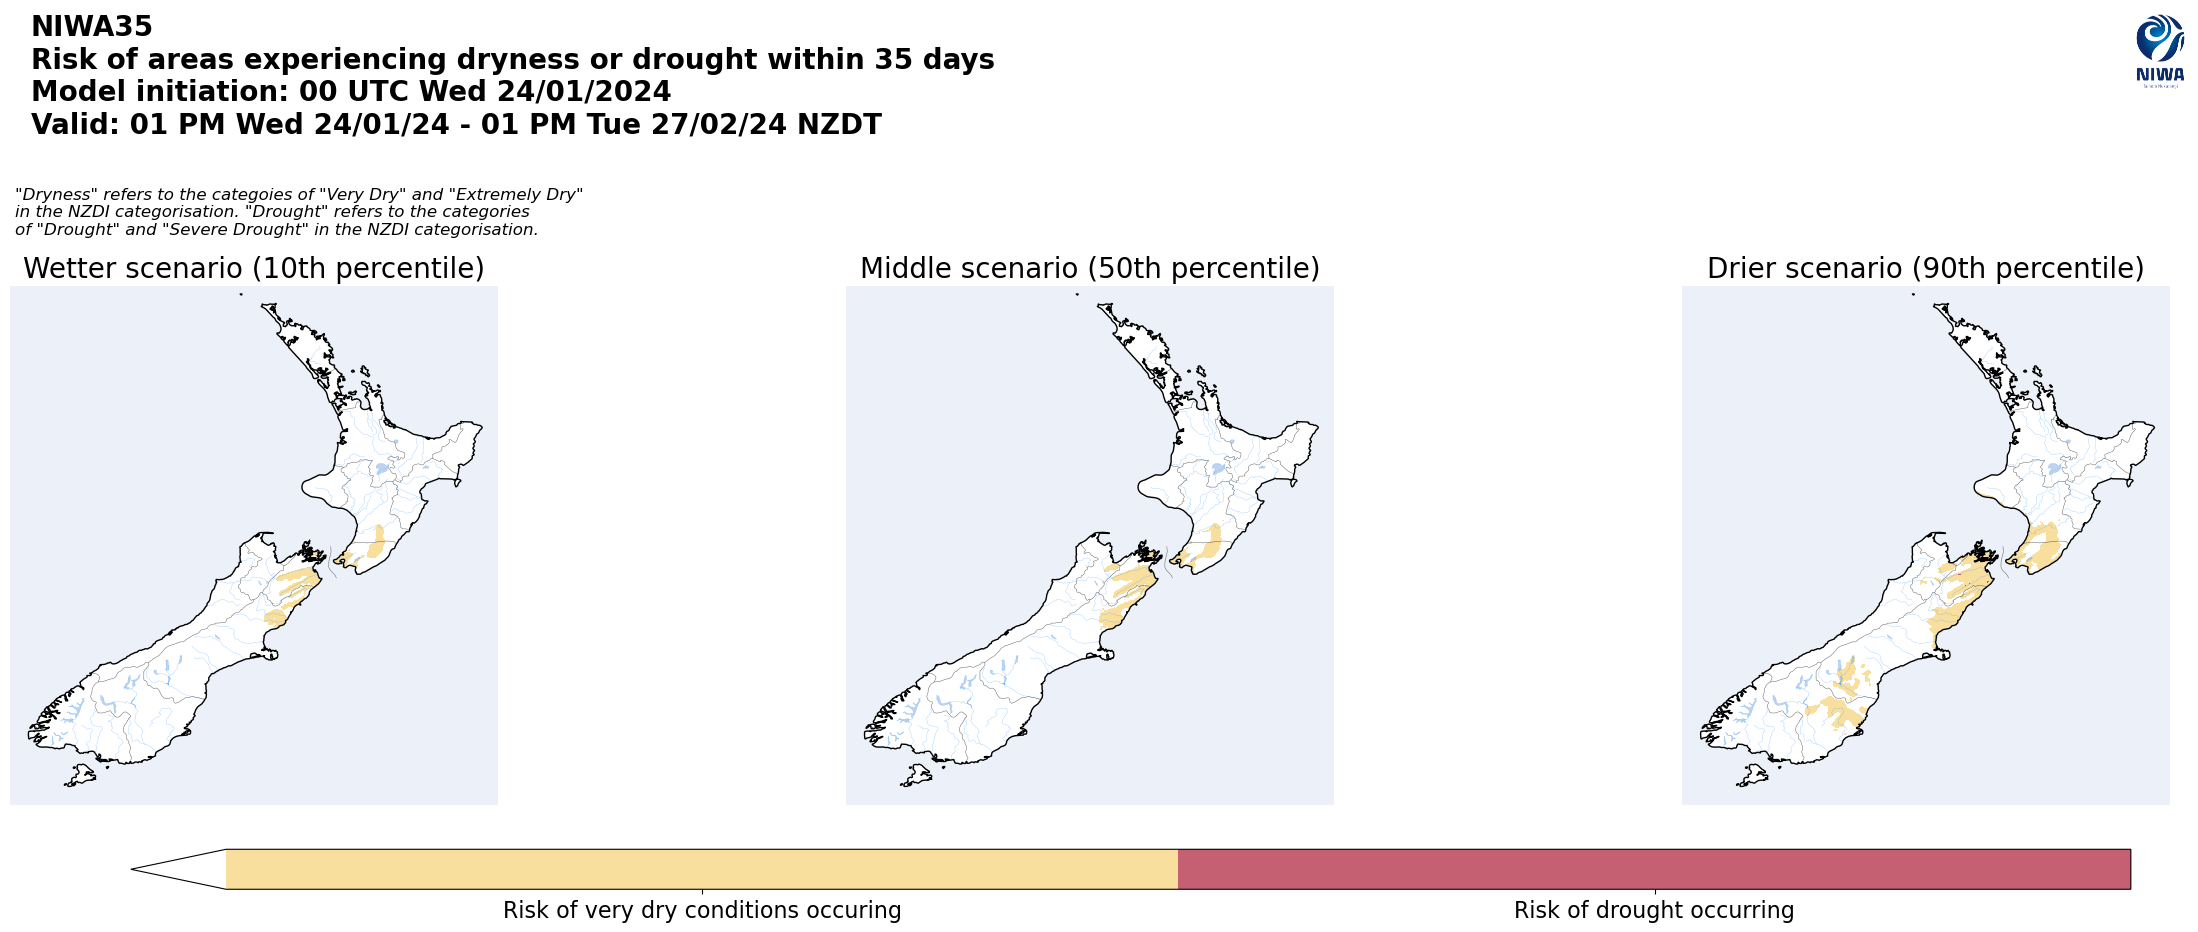 Risk of areas experiencing dryness or drought within 35 days from 24 January 2024